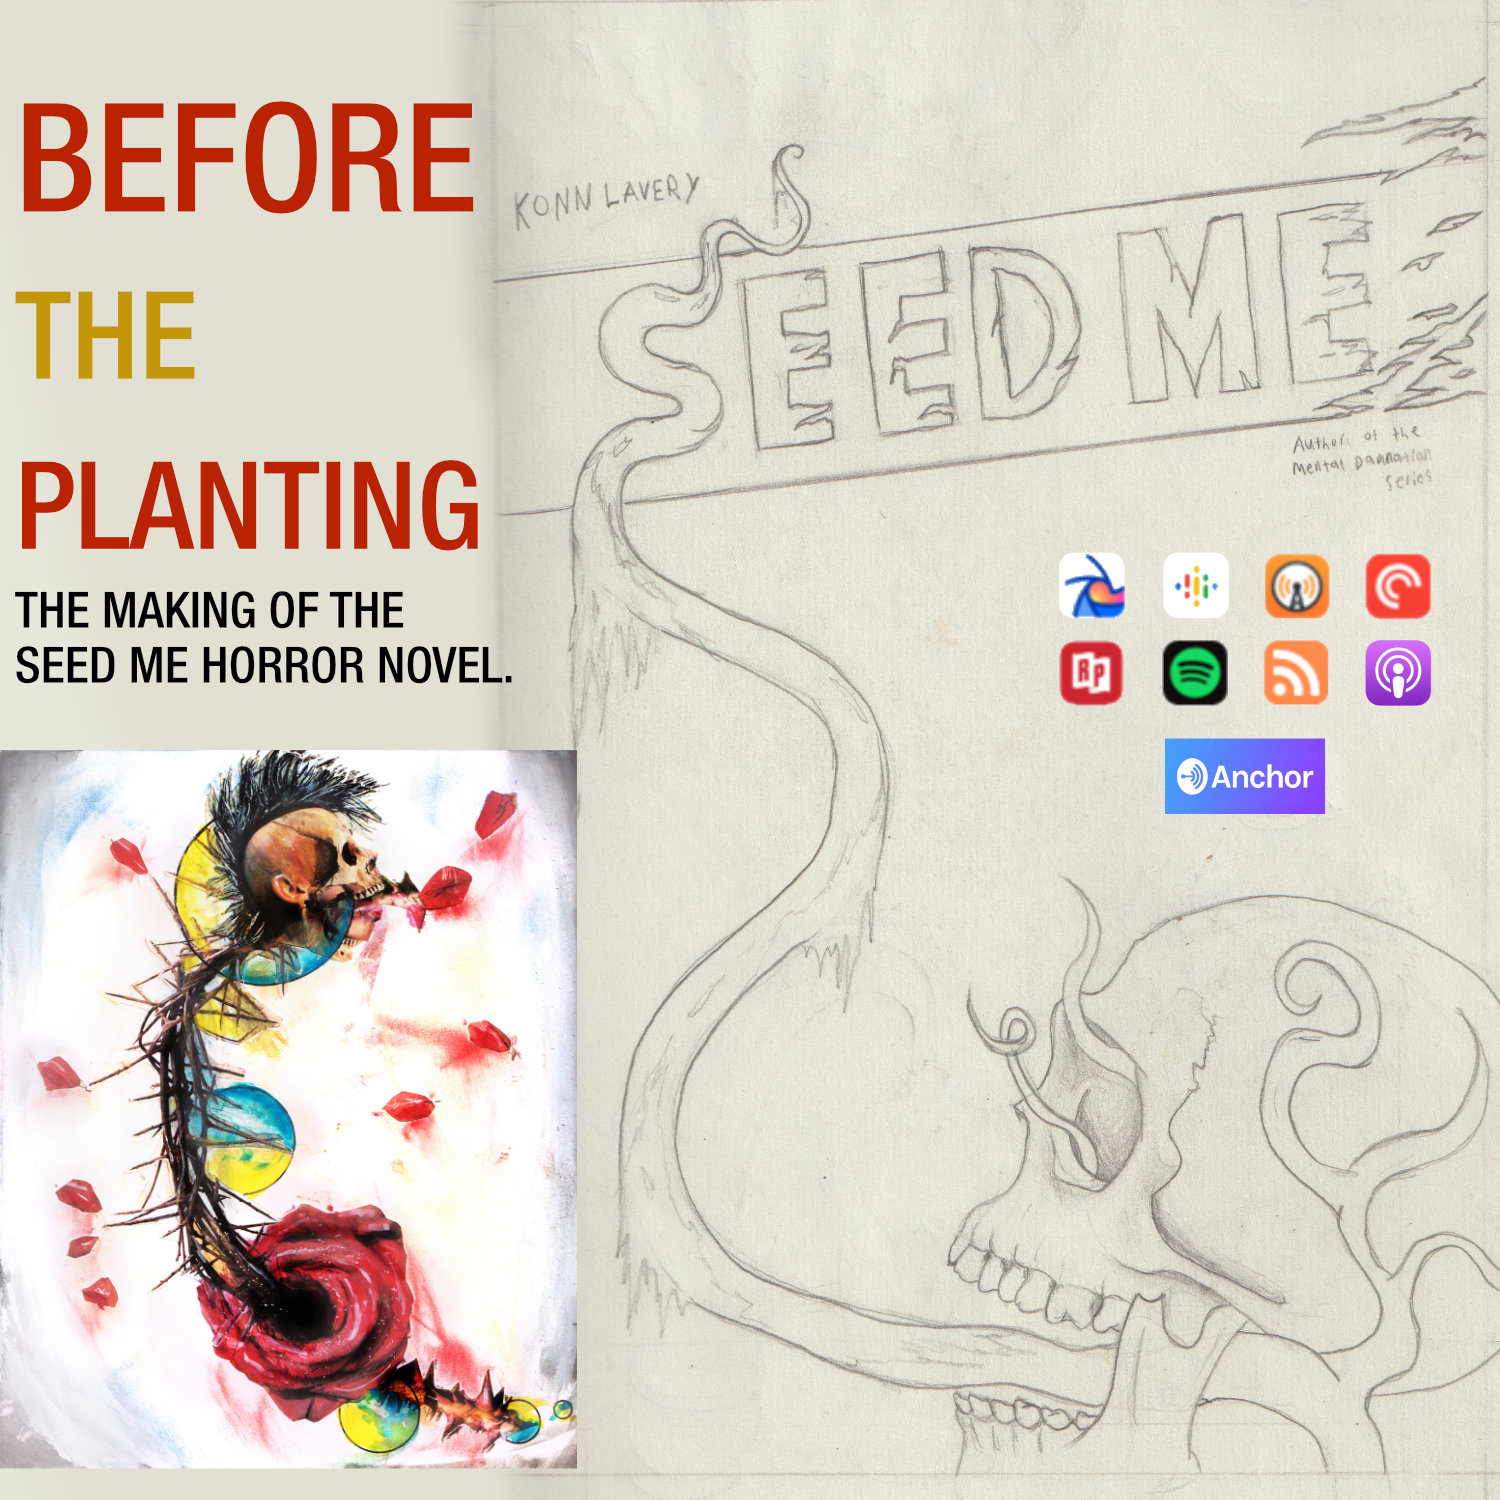 Before Planting – The Making of the Seed Me Horror Novel.